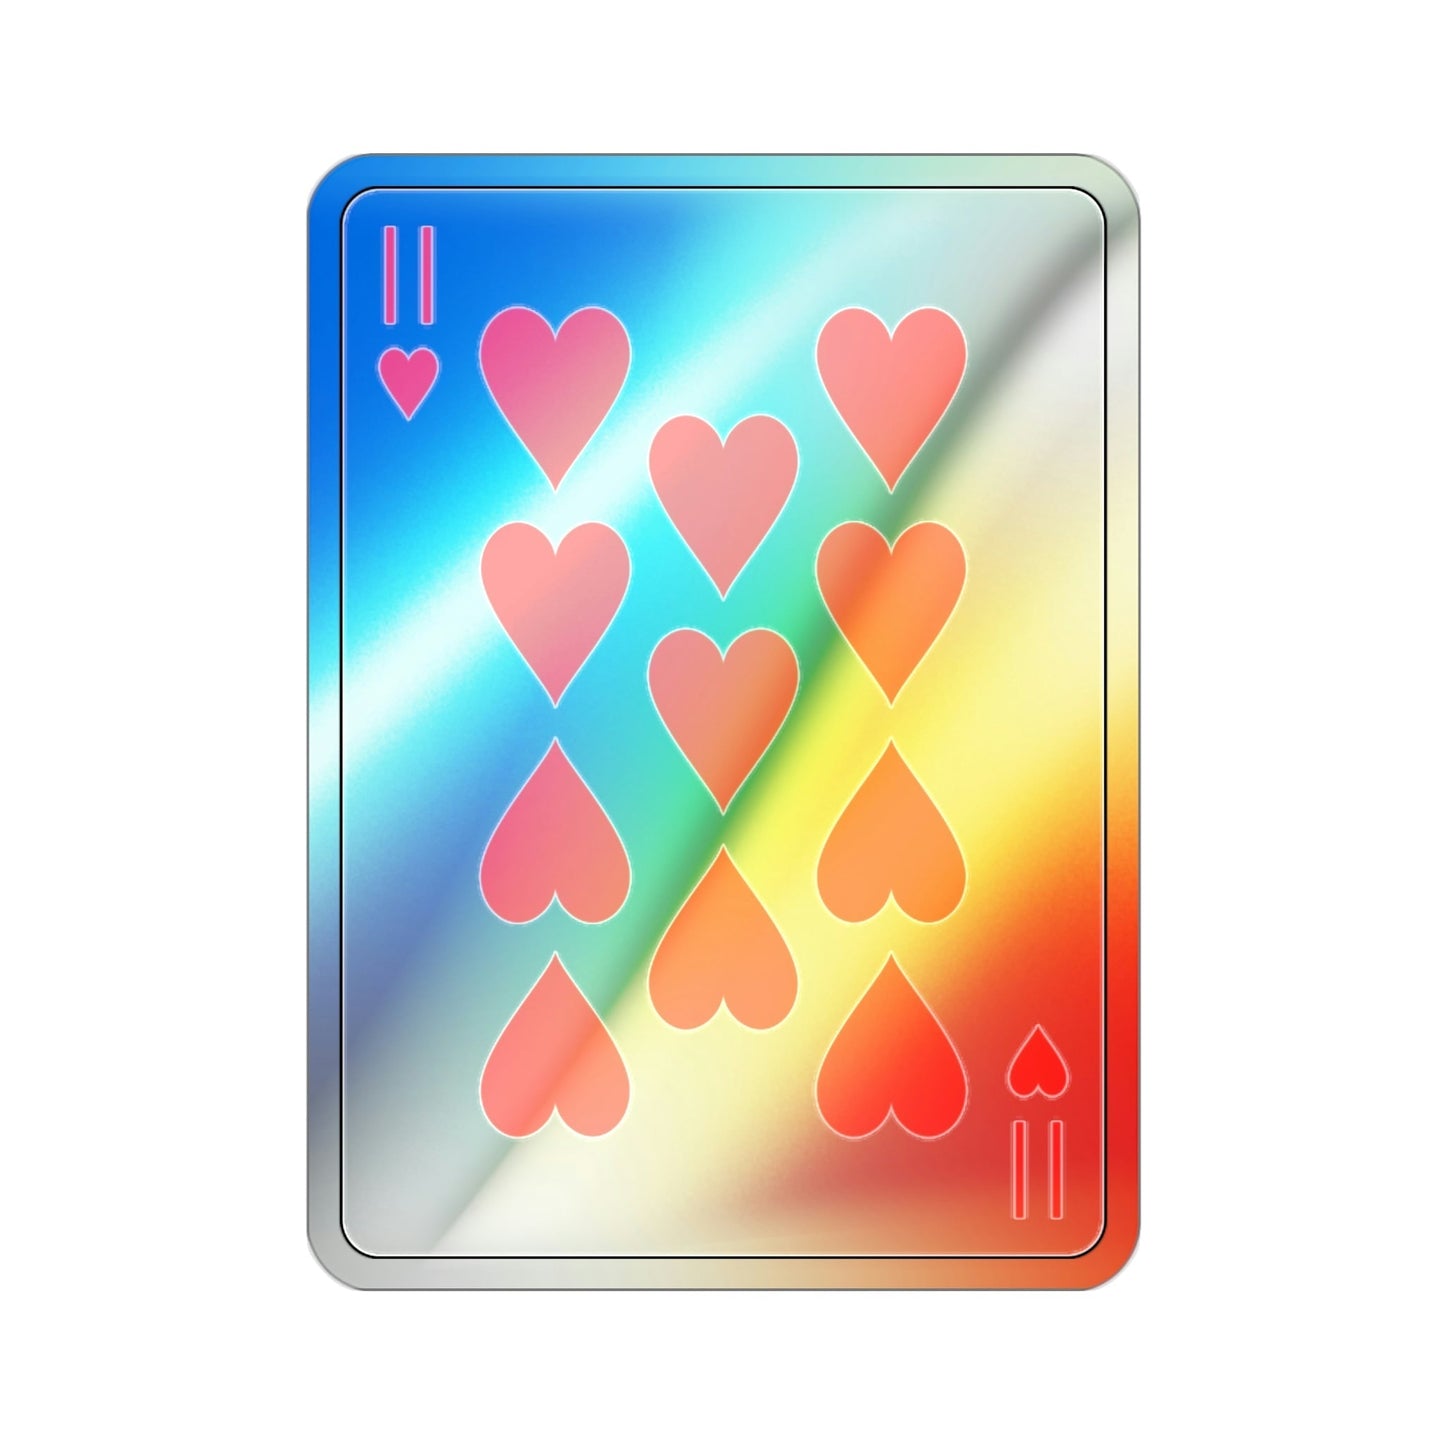 11 of Hearts Playing Card Holographic STICKER Die-Cut Vinyl Decal-2 Inch-The Sticker Space